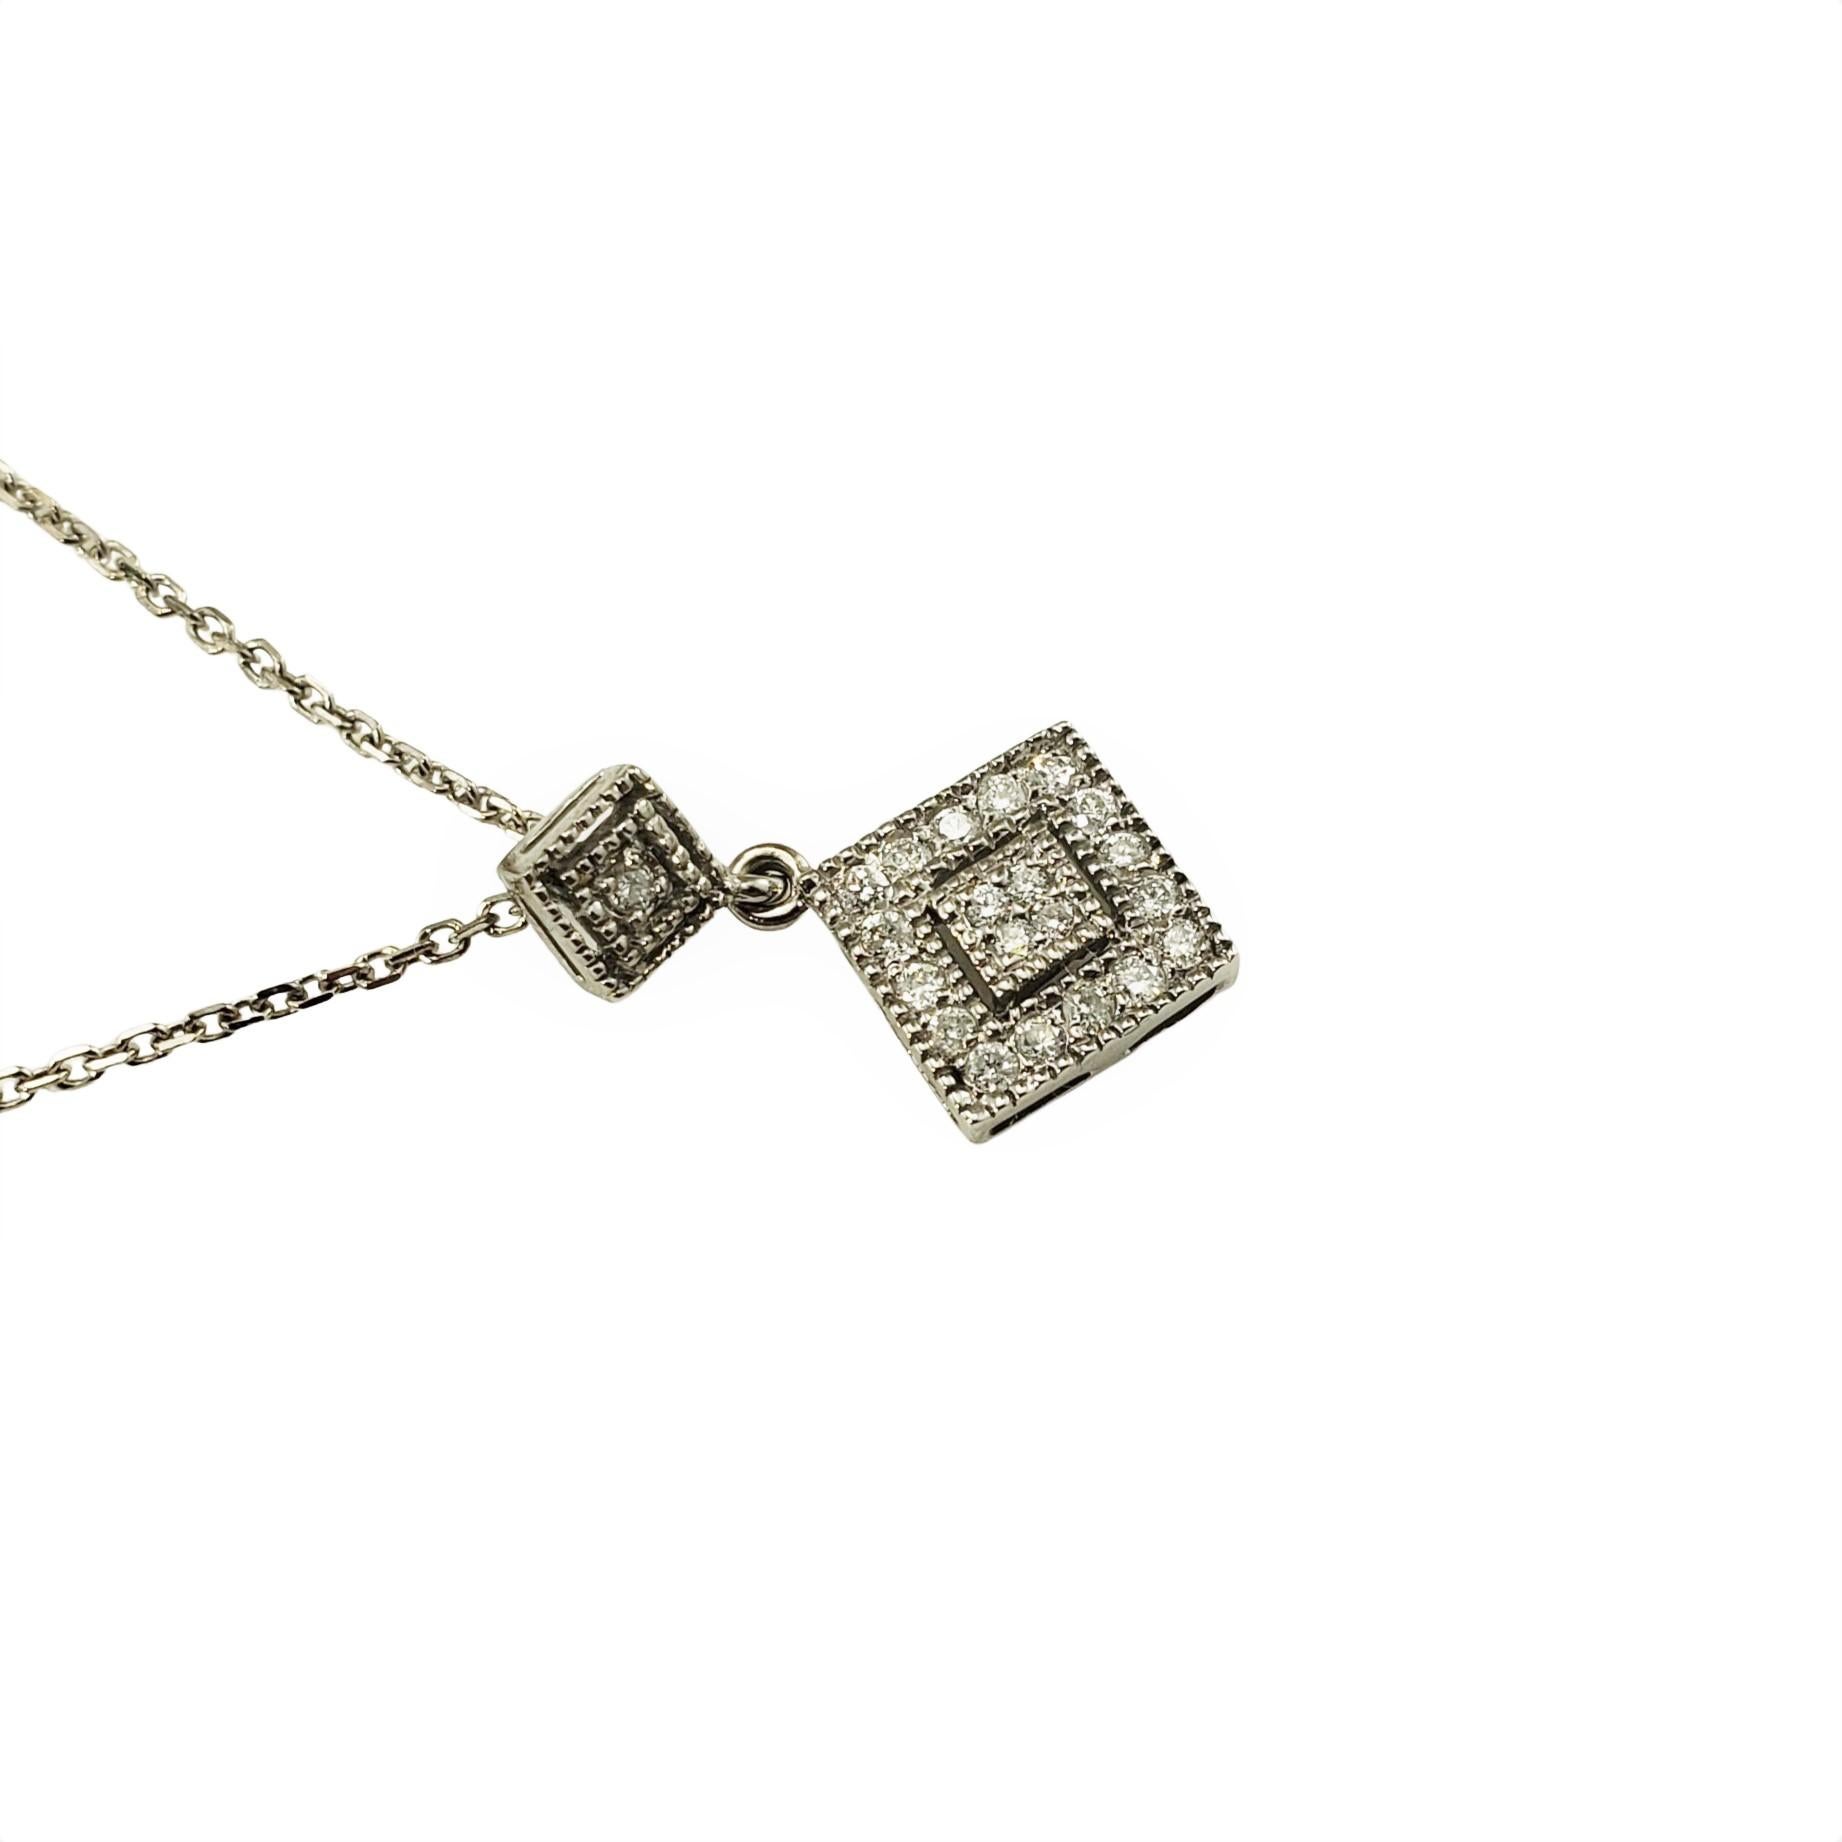 14 Karat White Gold and Diamond Pendant Necklace-

This sparkling pendant features one round brilliant cut diamond and nine baguette diamonds set in classic 10K white gold. Suspends from a classic 14K white gold box chain necklace.

Matching